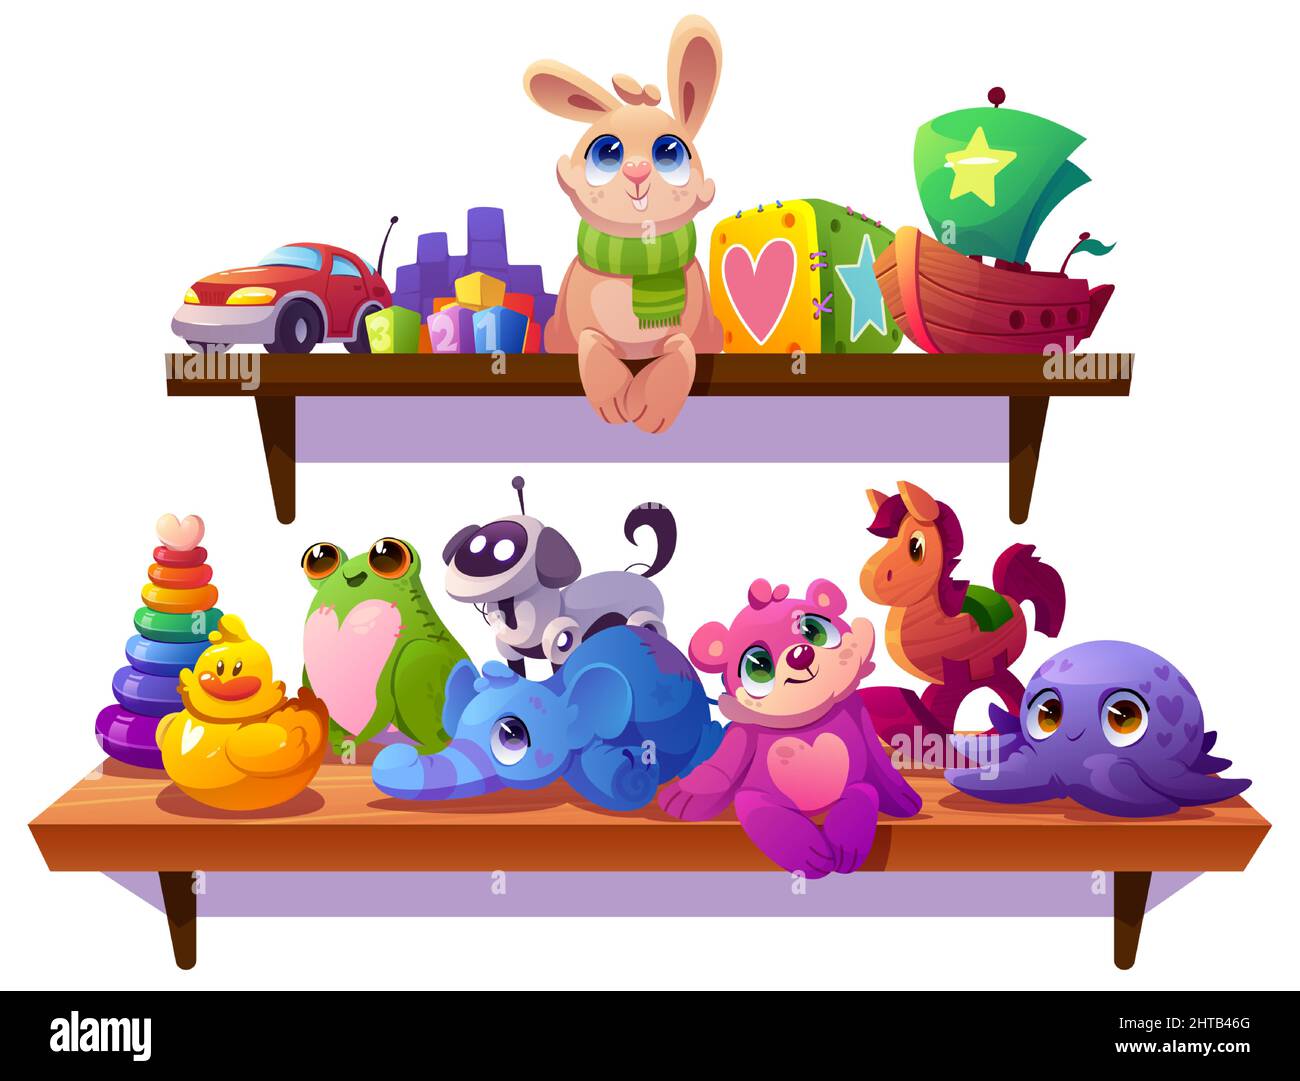 Kids toys, plush animals, car and wooden ship on shelves in child room, kindergarten or shop. Vector cartoon illustration of cute baby toys, soft bear, rabbit, blocks, pyramid, dog robot and duck Stock Vector